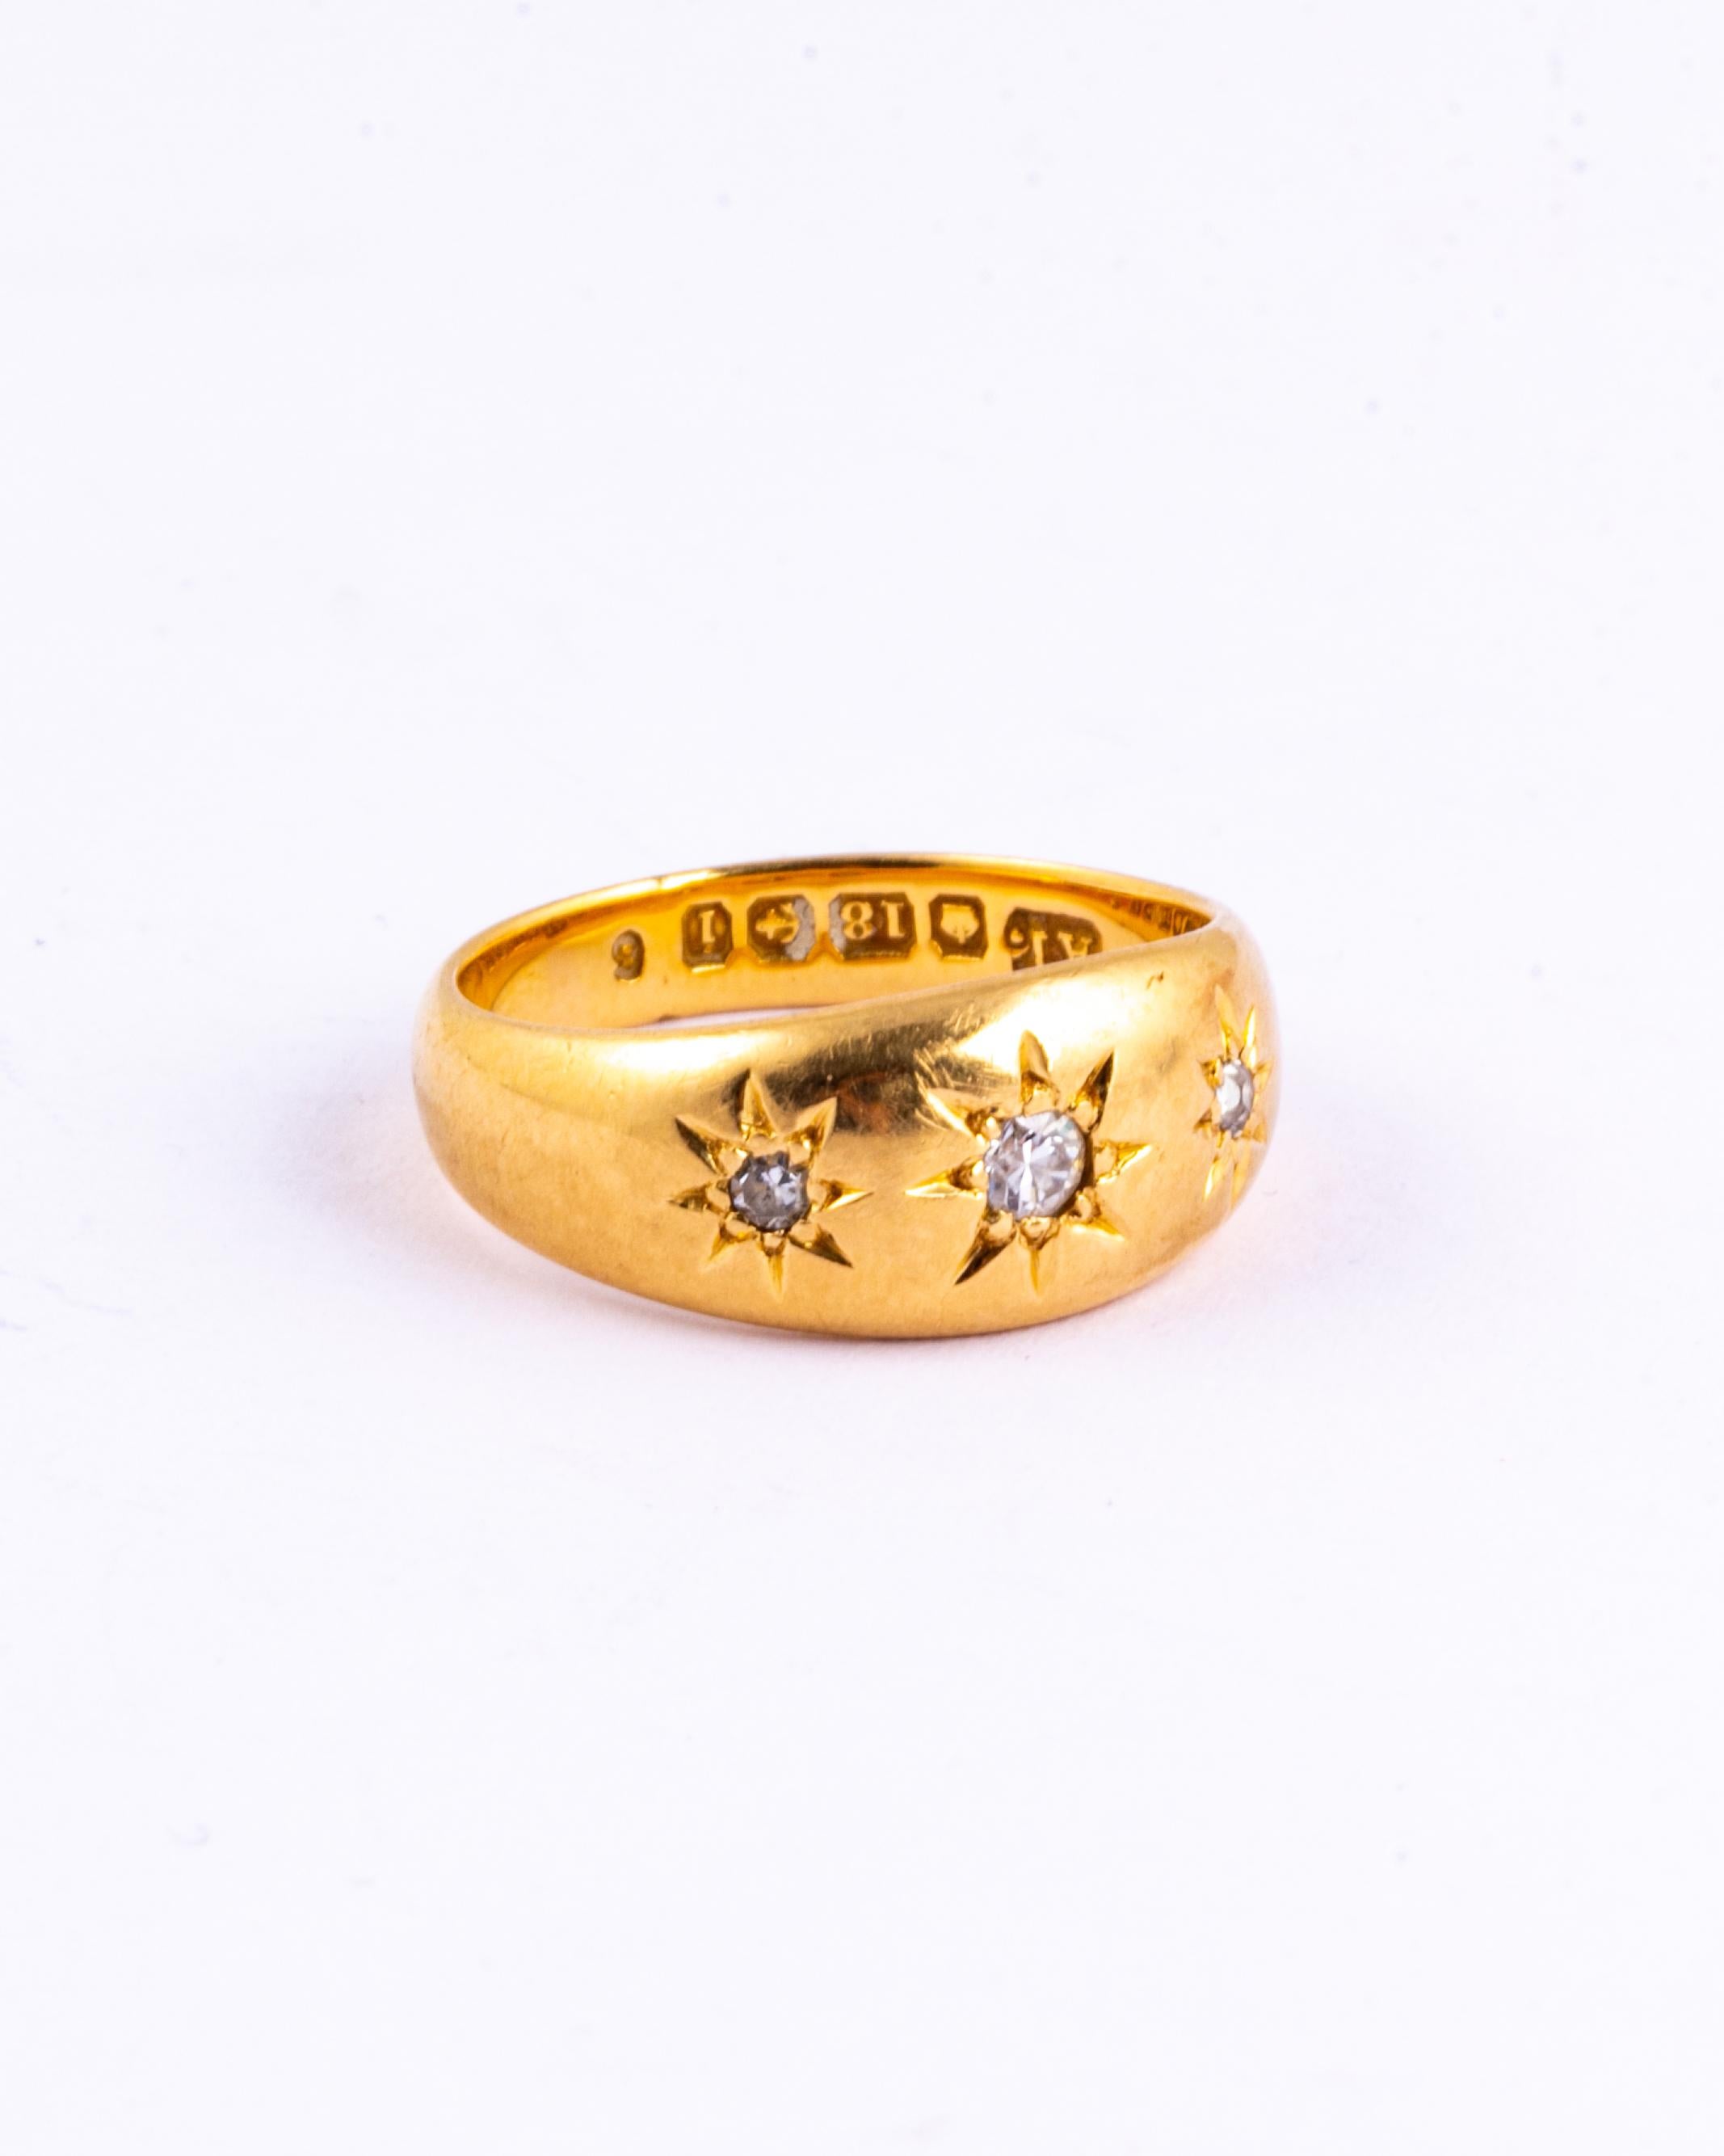 This gypsy ring holds three diamonds totalling approx 20pts and these are set in star settings. The glossy gold band is modelled in 18ct gold and made in Birmingham, England.

Ring Size: K or 5 1/4 
Band Width: 8mm

Weight: 6.2g